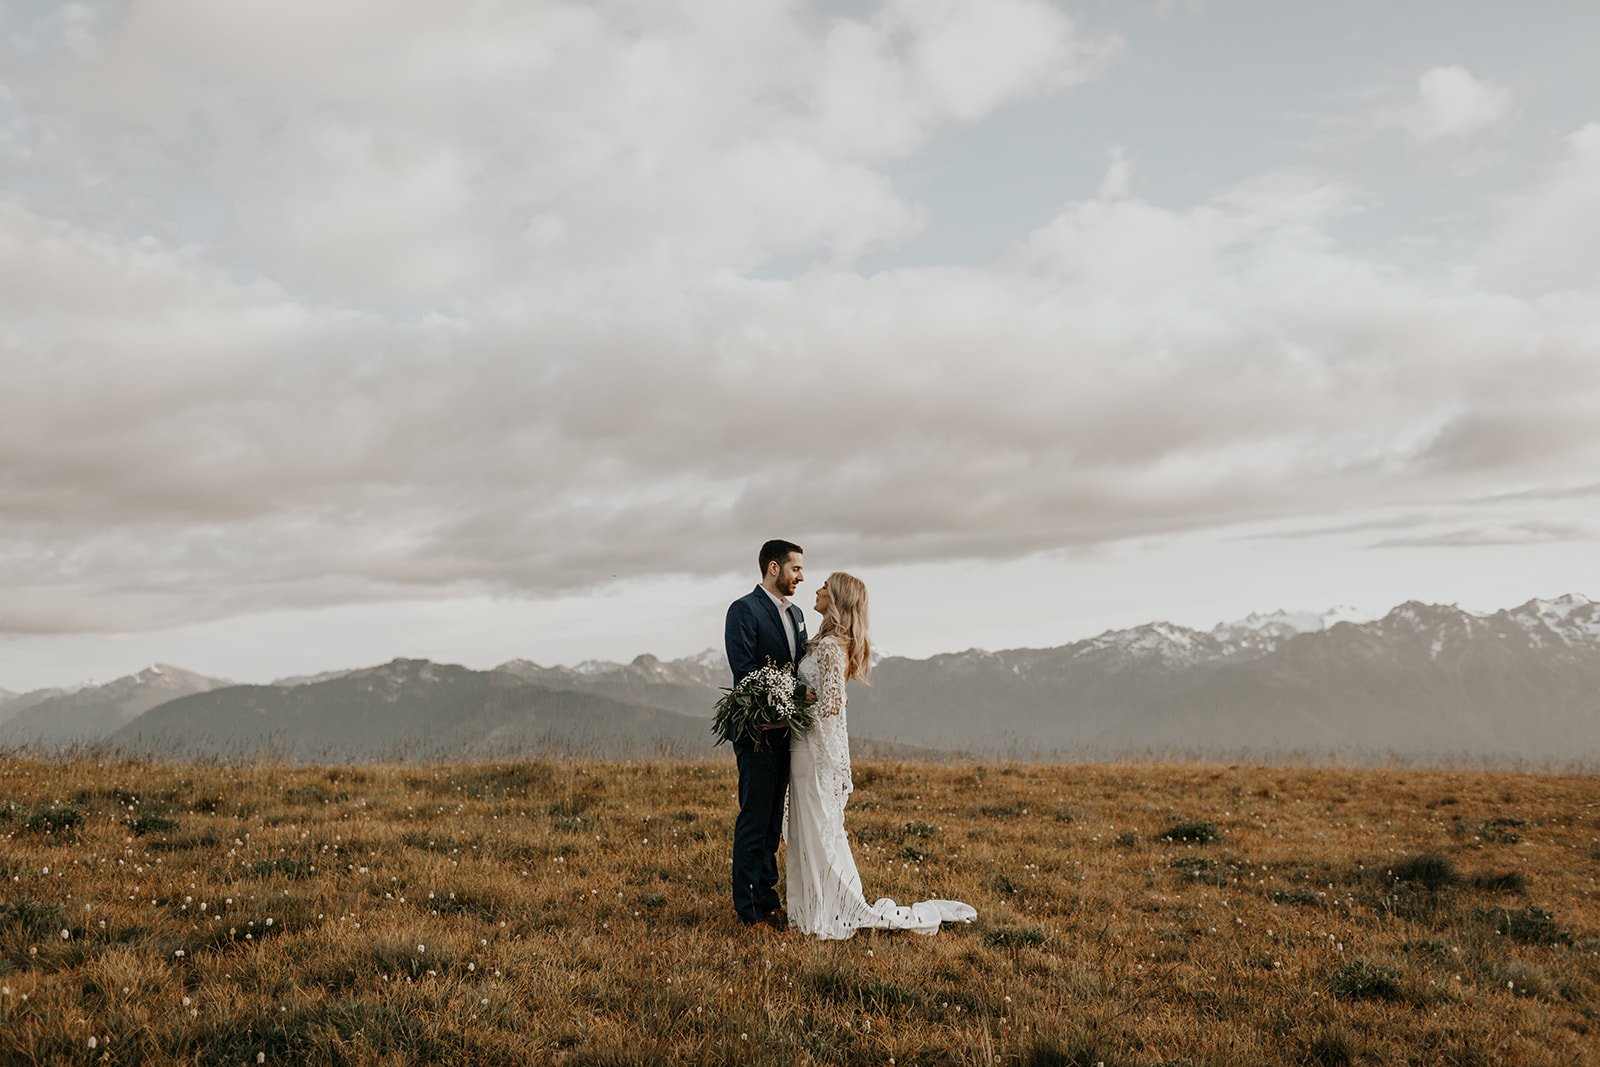 Bride and Groom in their wedding attire standing in a meadow with mountains in the backdrop